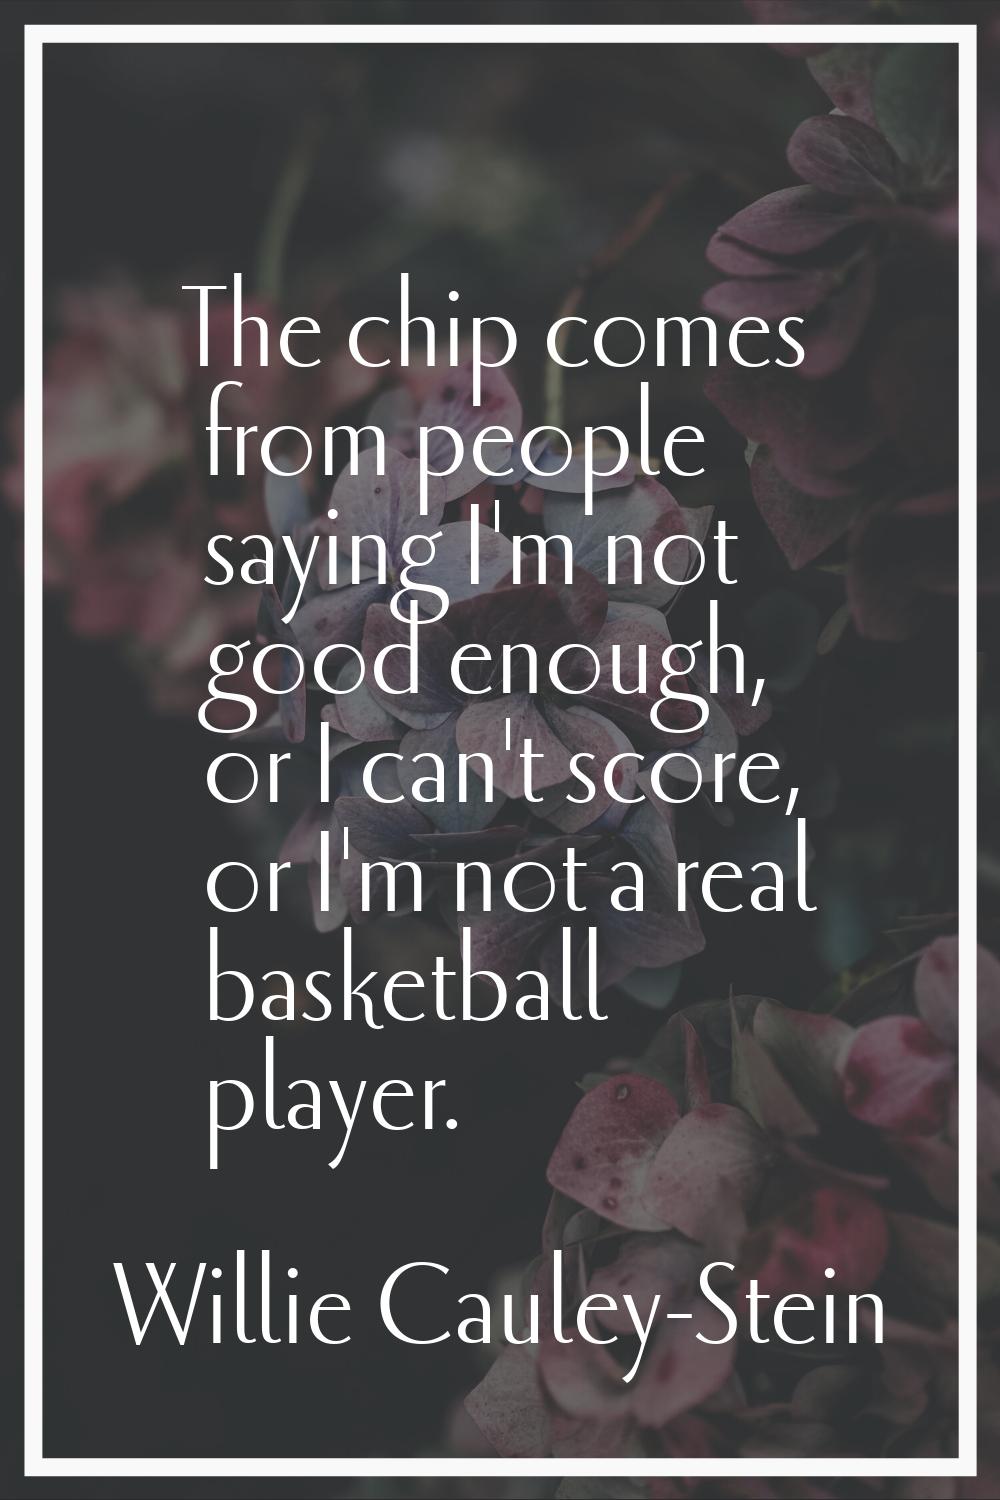 The chip comes from people saying I'm not good enough, or I can't score, or I'm not a real basketba